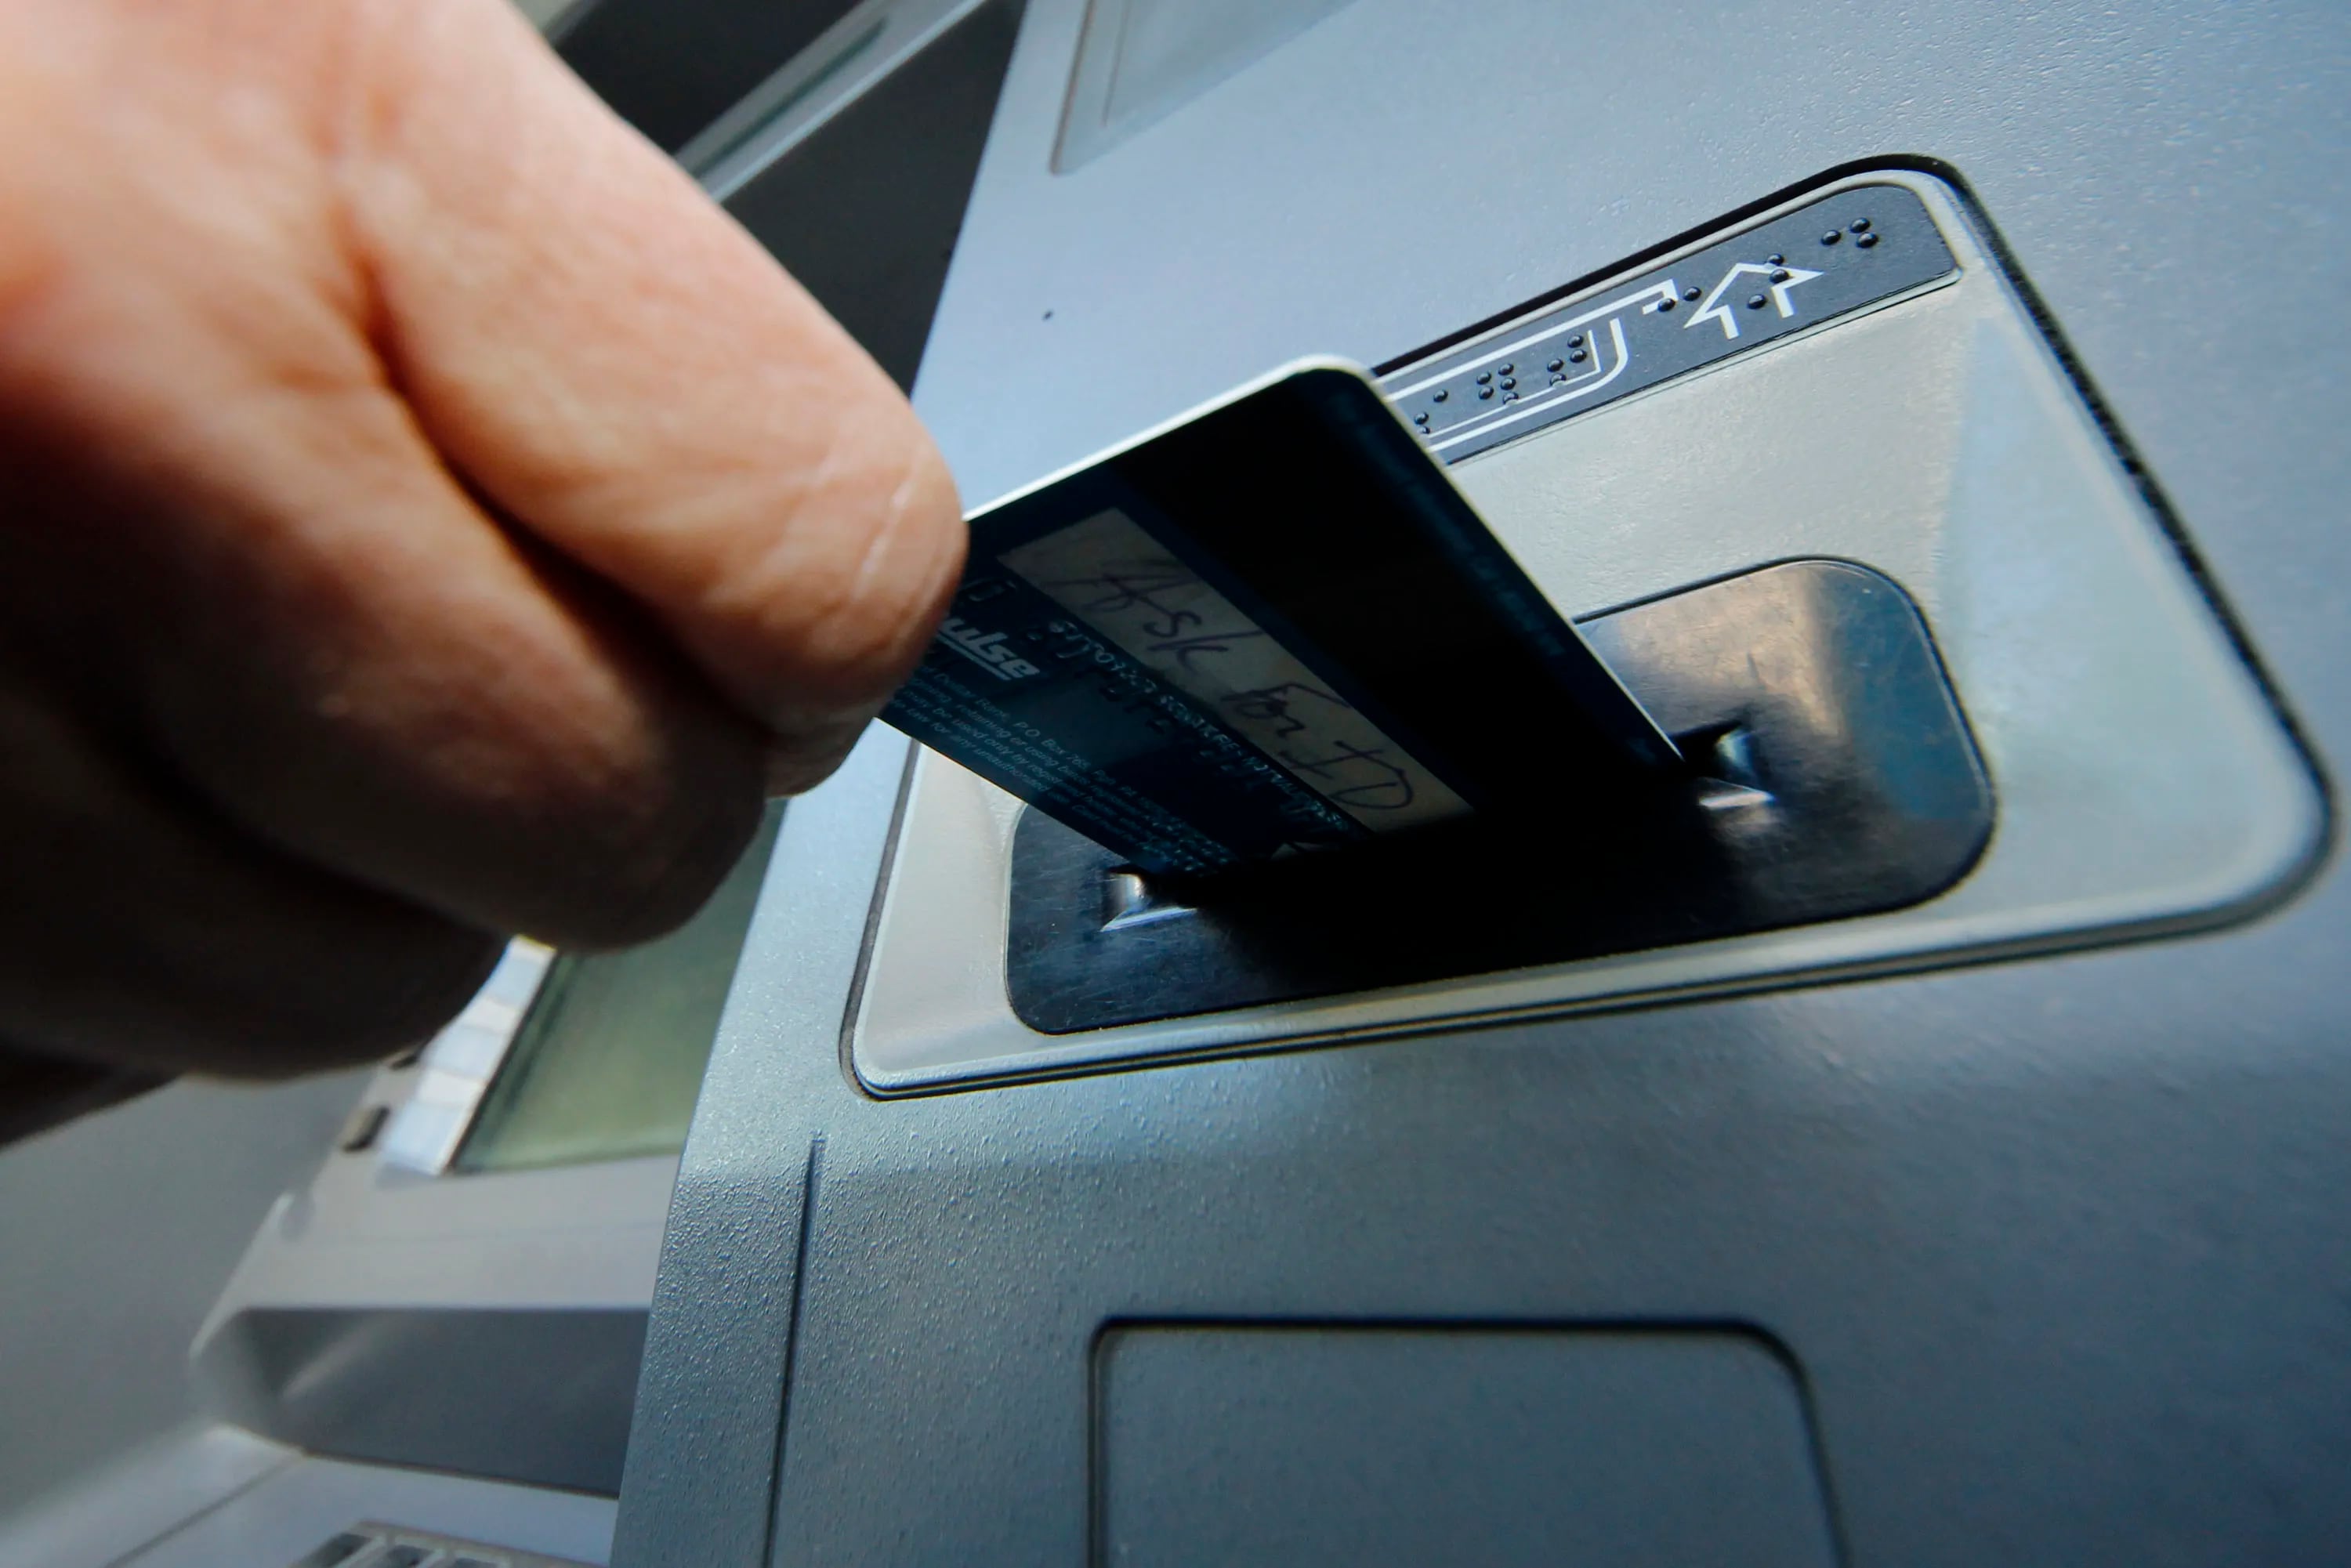 A person inserts a debit card into an ATM in Pittsburgh in this 2013 file photo.